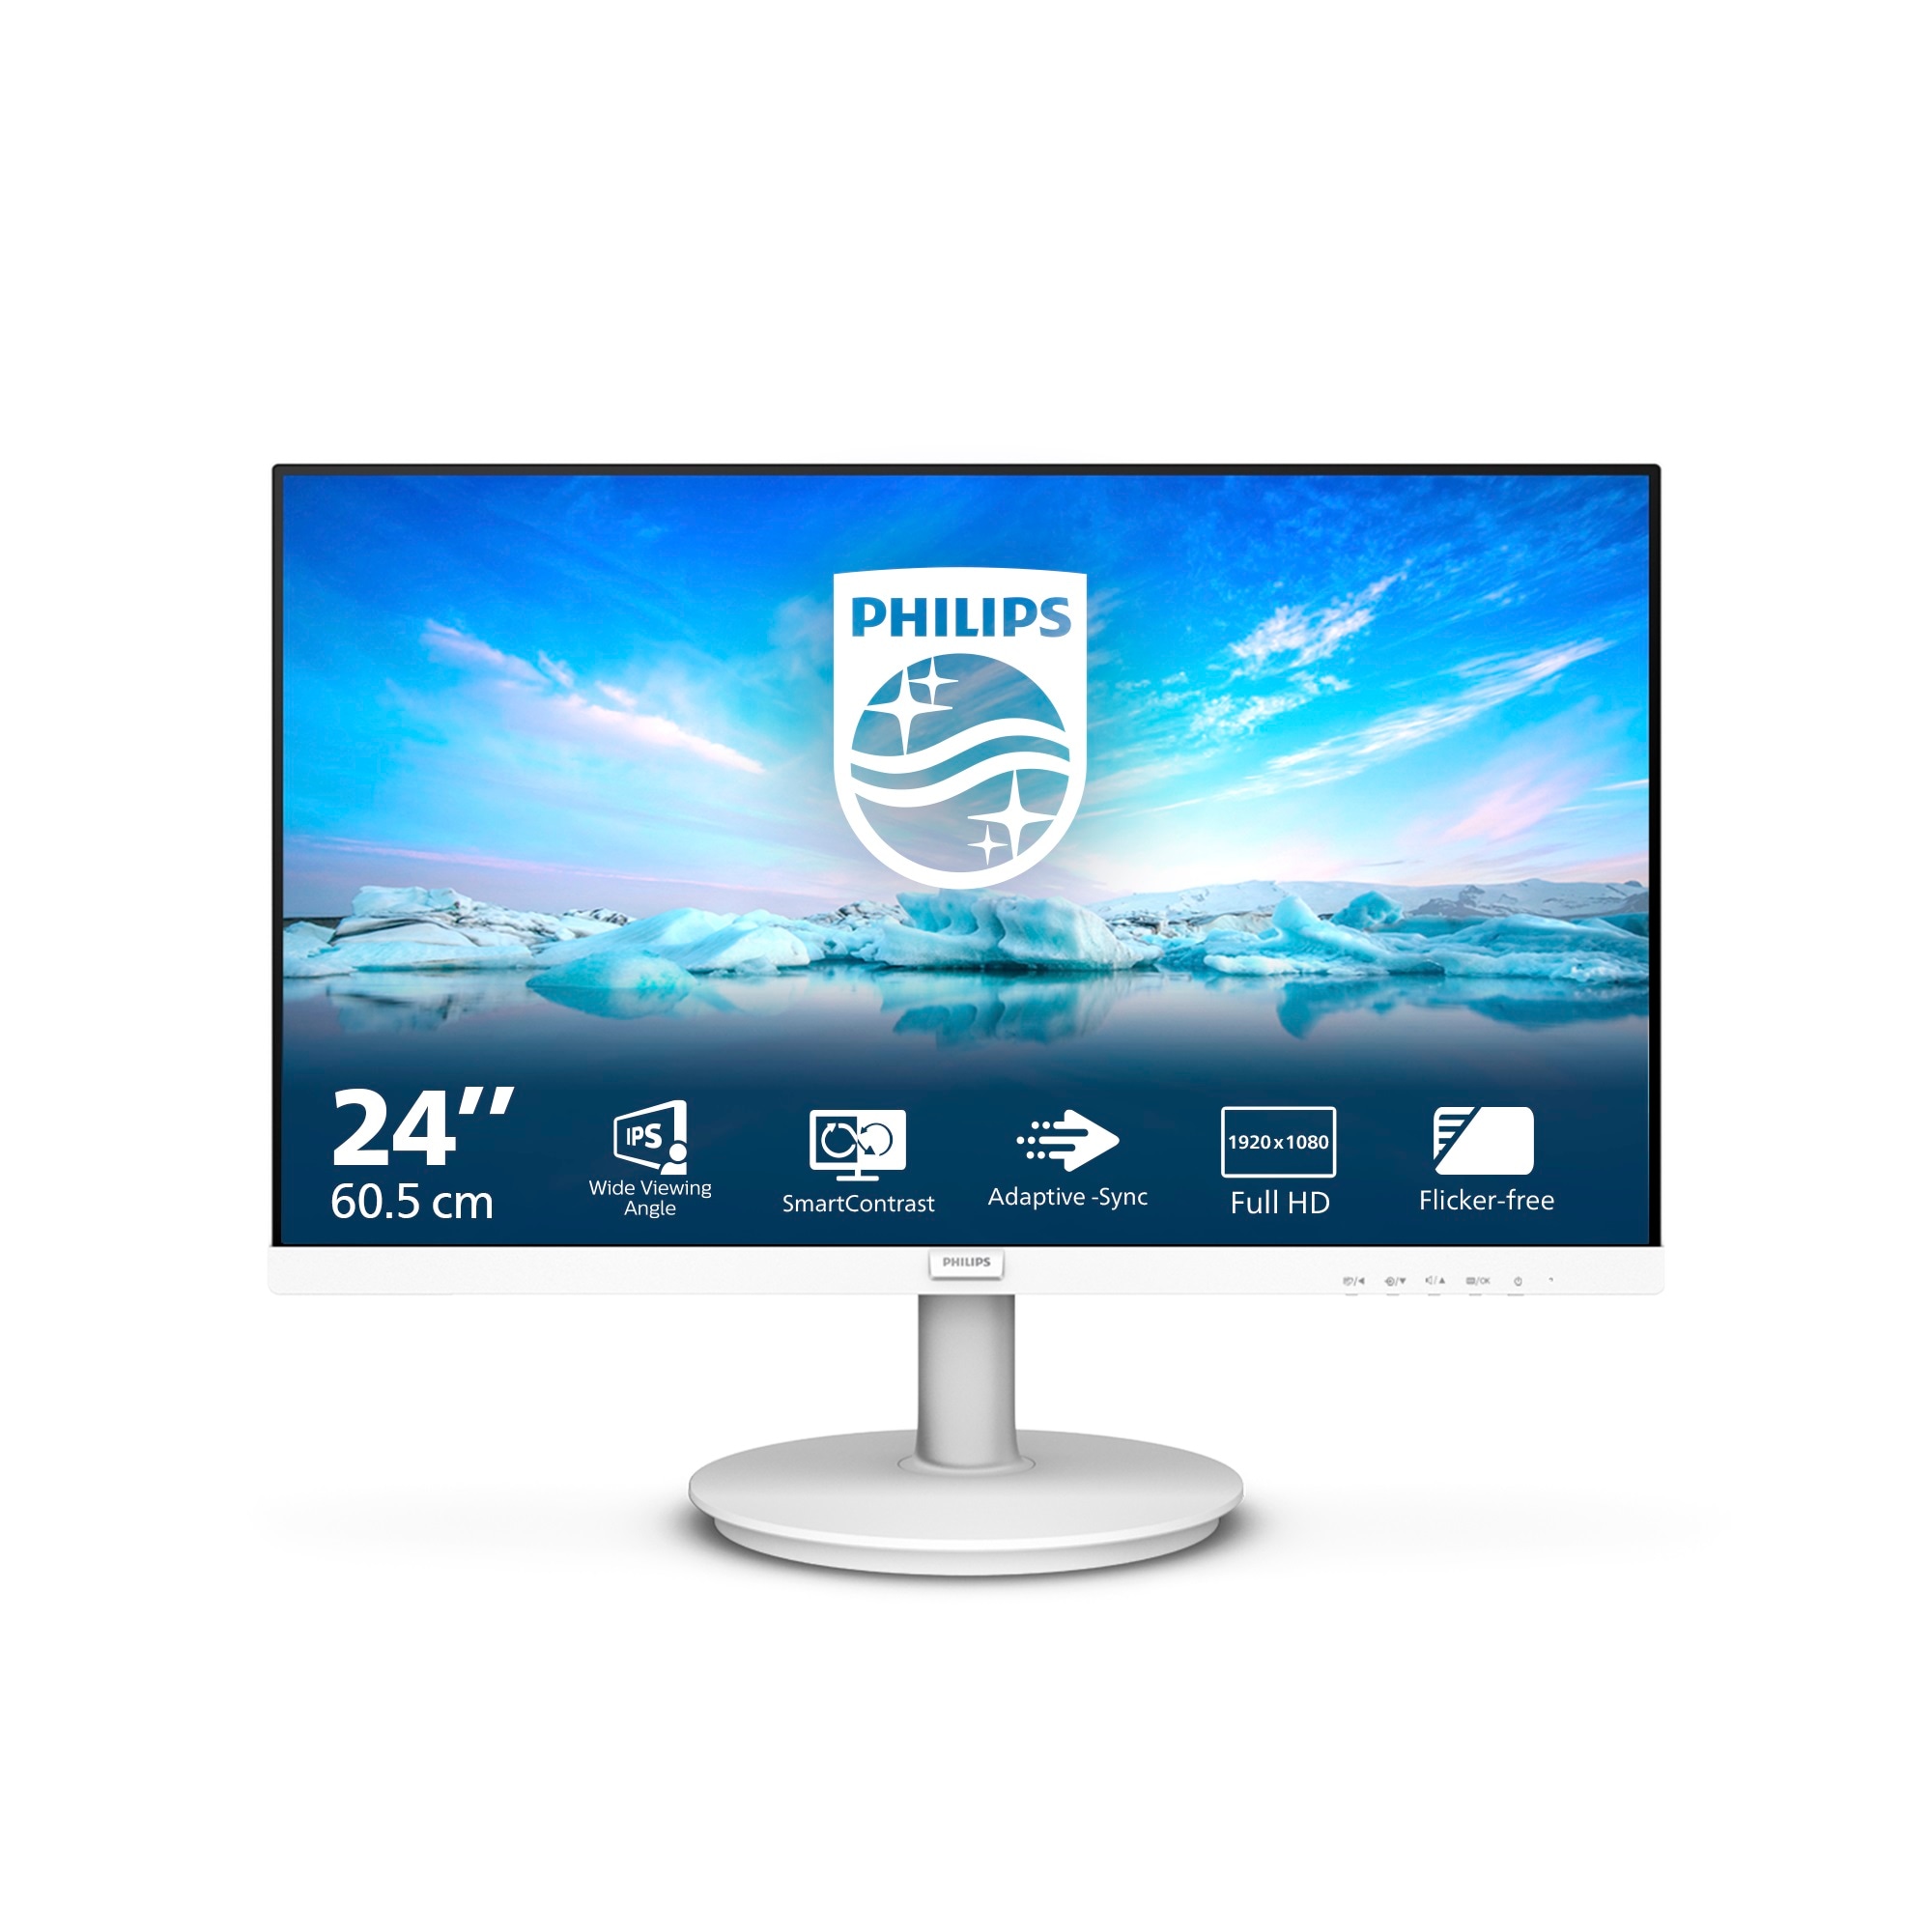 LCD-Monitor »241V8AW«, 60,5 cm/24 Zoll, 1920 x 1080 px, Full HD, 4 ms Reaktionszeit,...